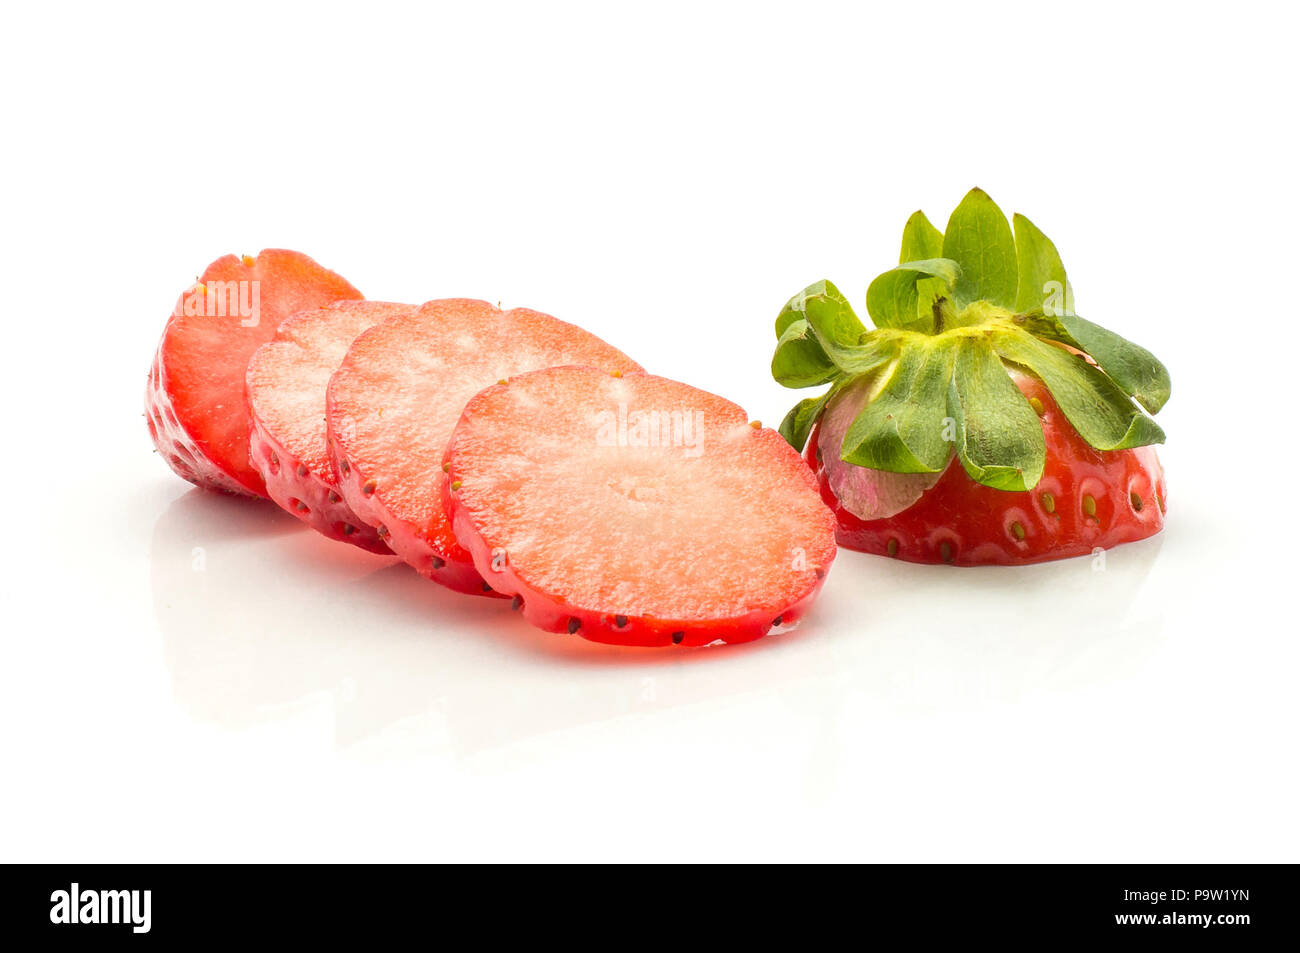 Sliced garden strawberry isolated on white background five round slices Stock Photo